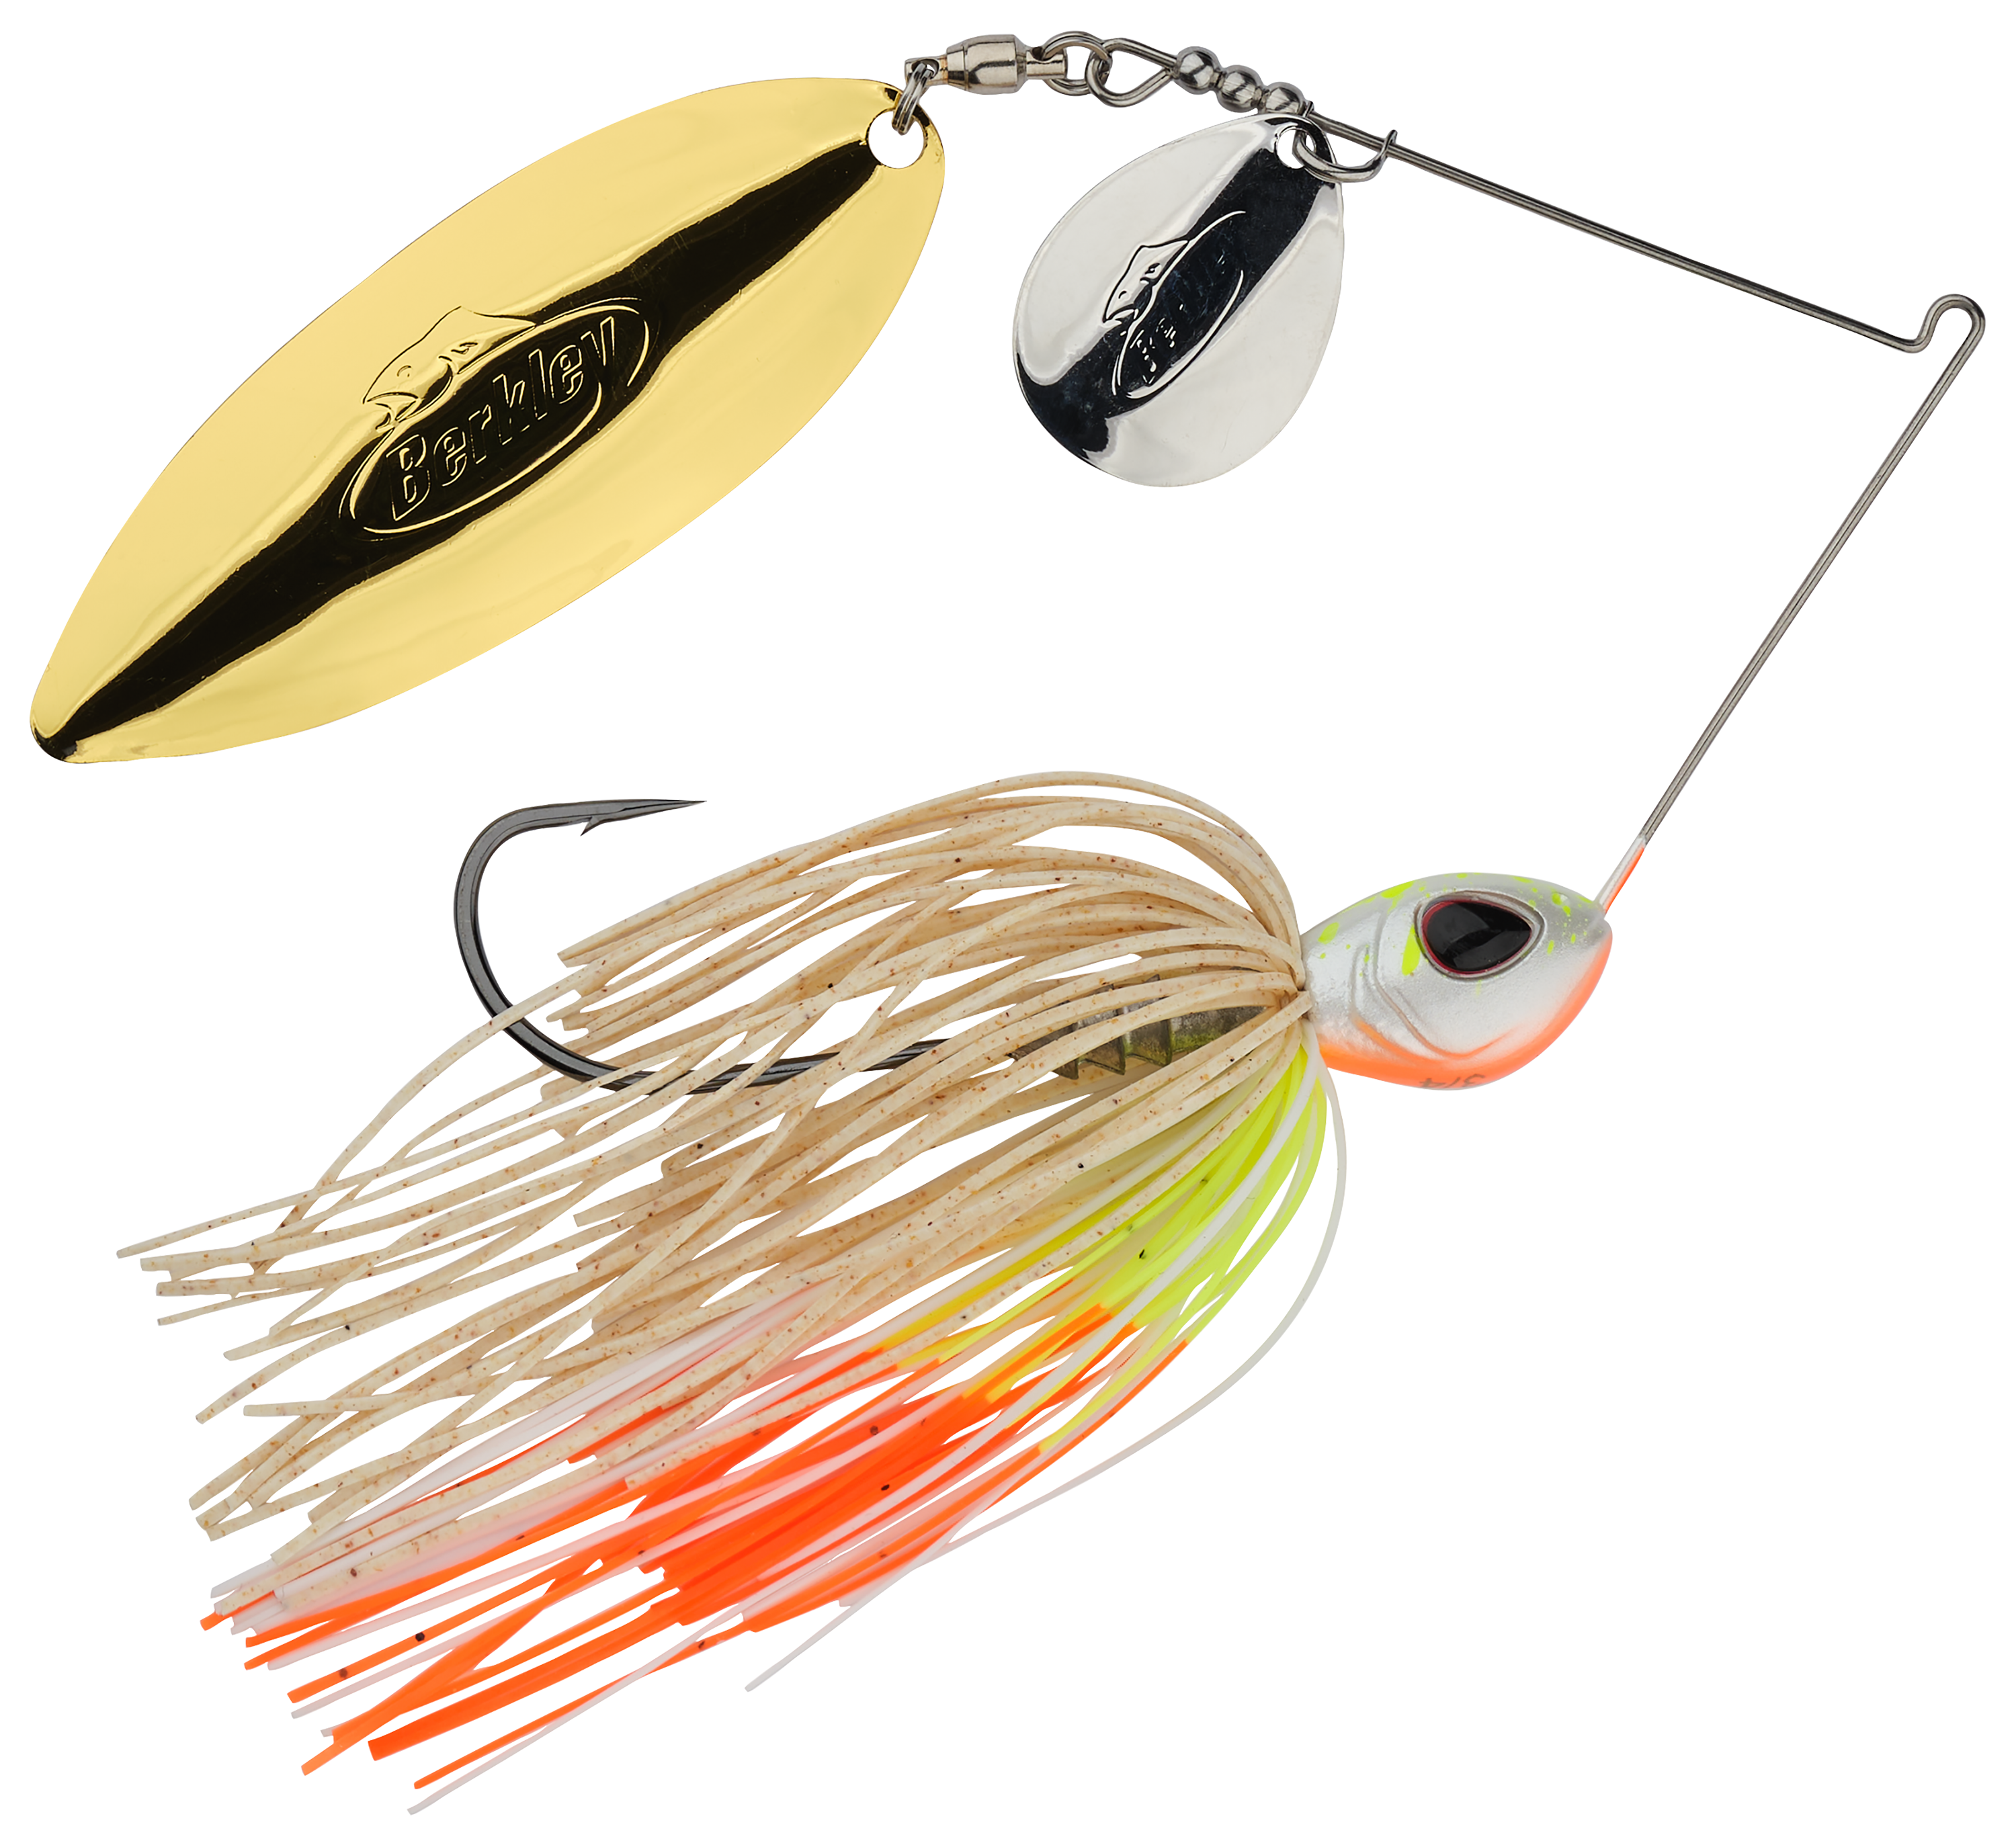 the standard spinnerbait for bass fishing